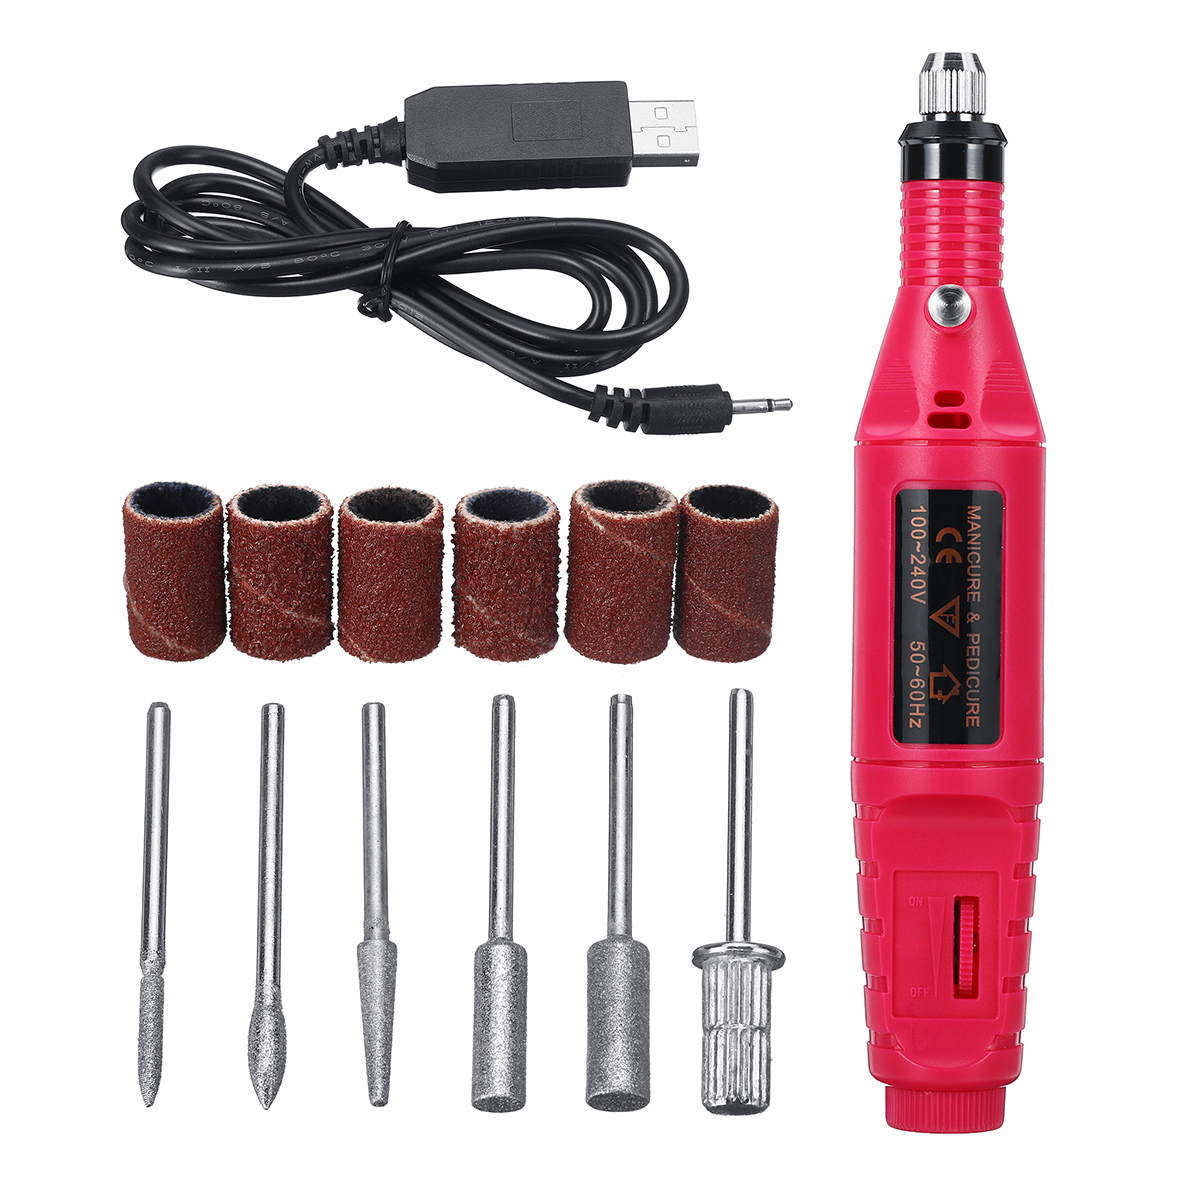 USB-Mini-Electric-Grinder-Engraving-Pen-Milling-Rotary-Drill-Grinder-Tool-Milling-Polishing-Drilling-1442450-10